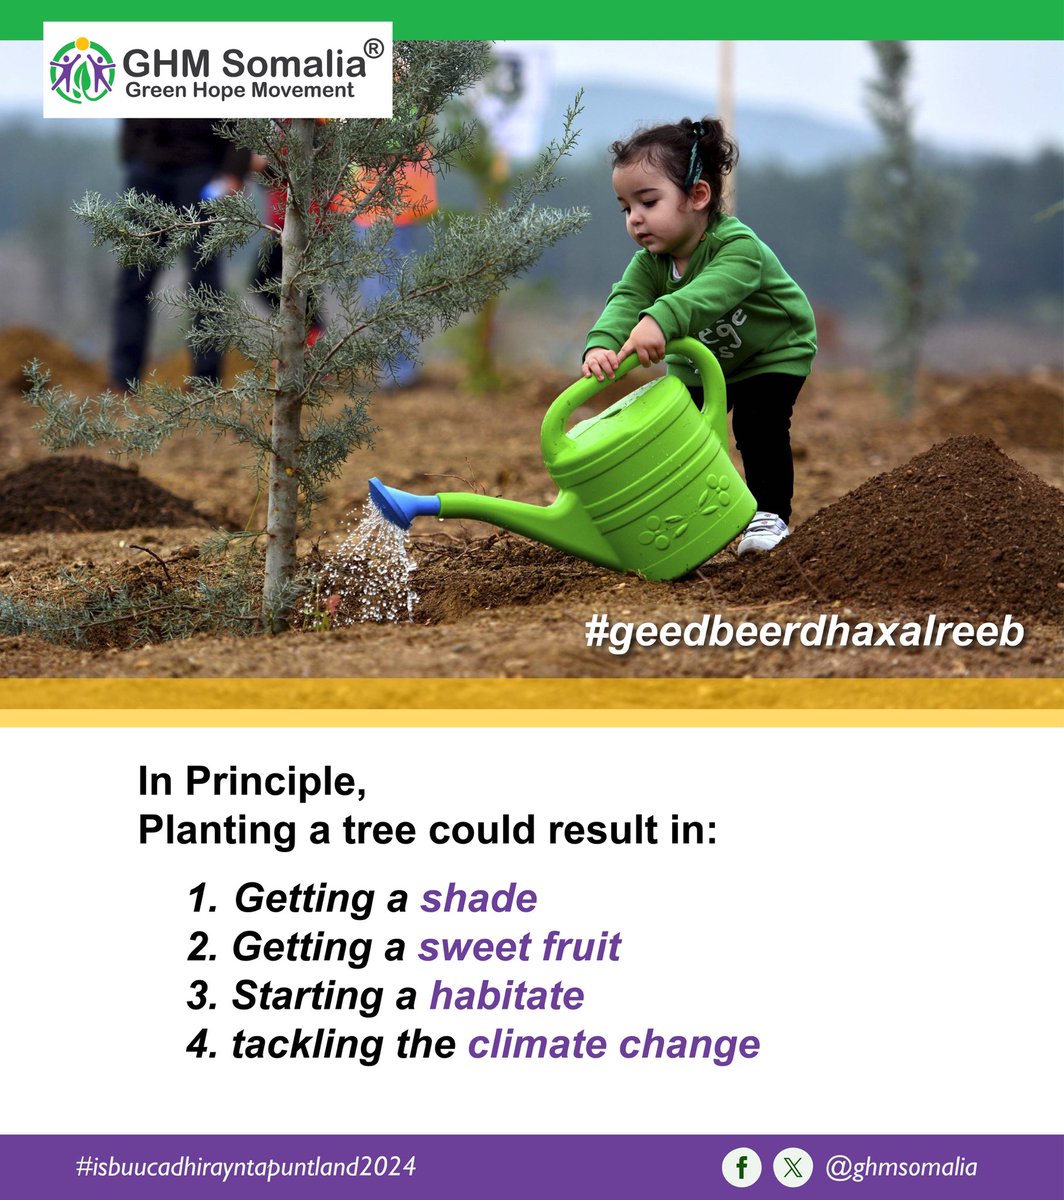 🌳🌍 Planting trees isn't just about greenery, it's a powerhouse solution to combat climate change! 🌳 From absorbing CO2 to preserving biodiversity, #TreePlantation is a crucial pillar in our fight for a sustainable future. Let's get our hands dirty for a greener, cooler planet!